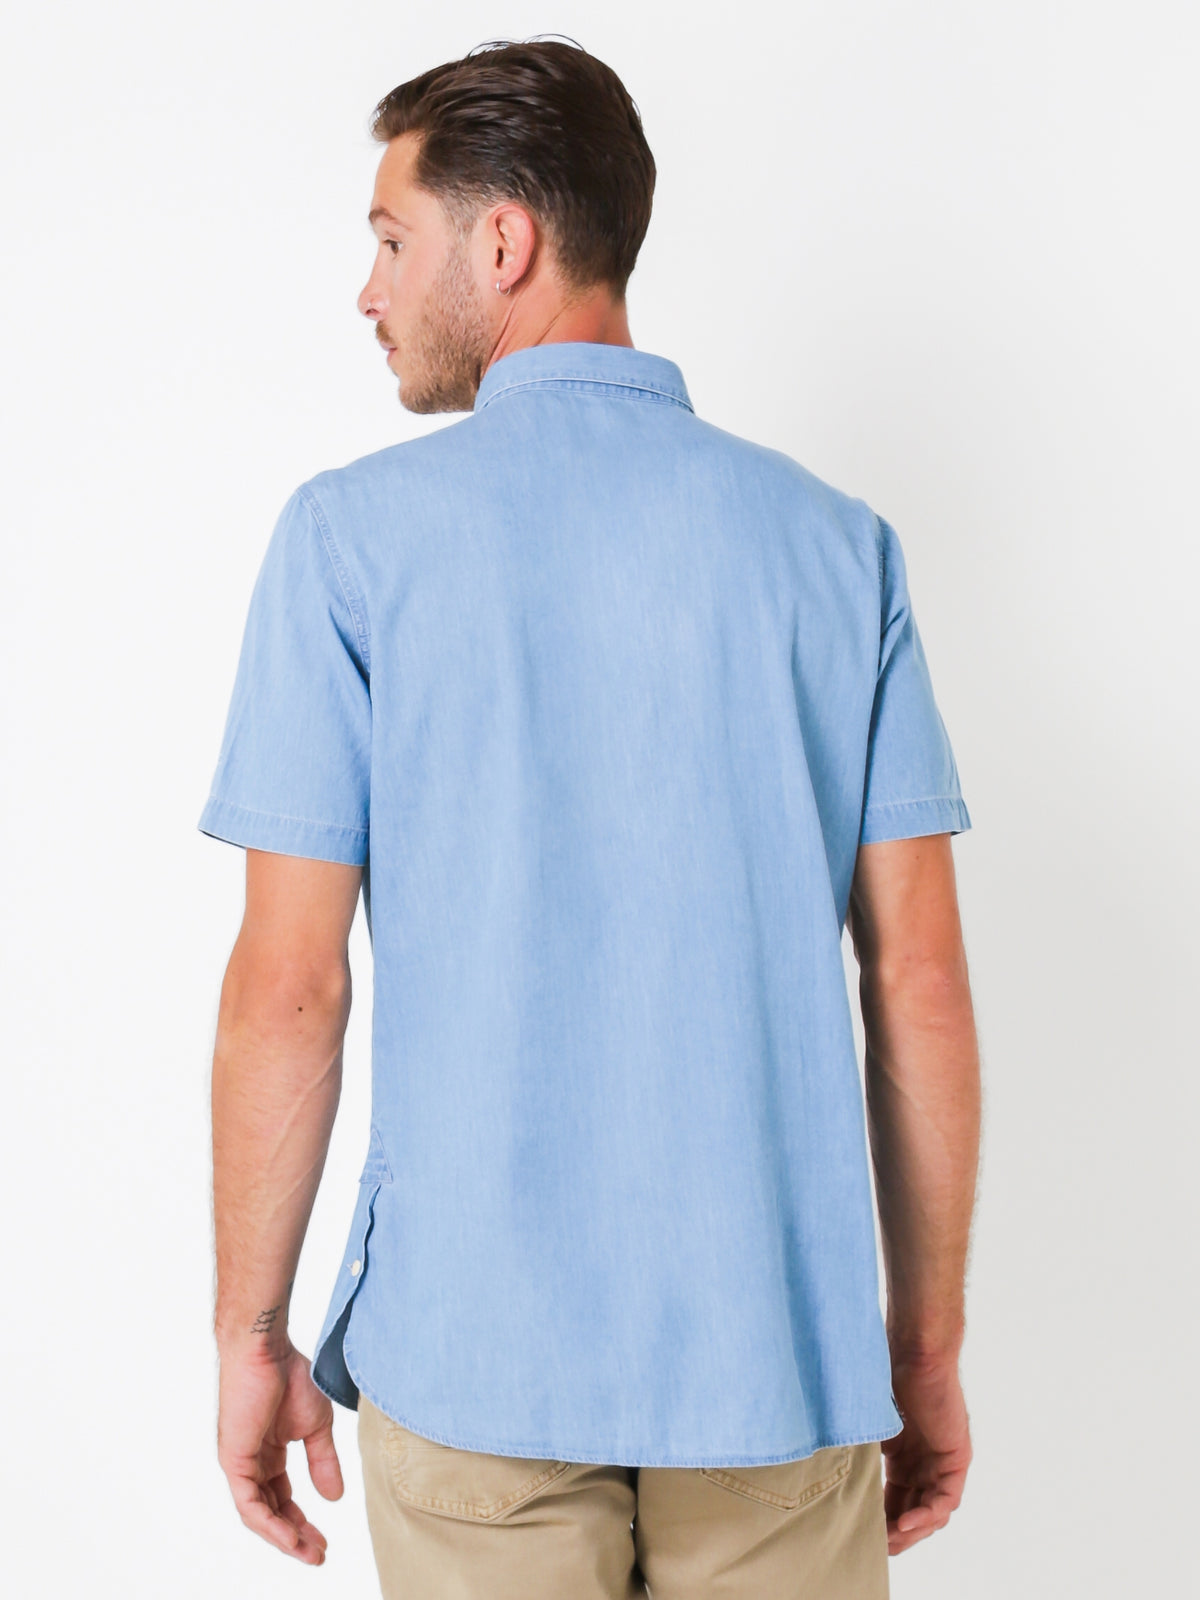 Aires Short Sleeve Shirt in Washed Chambray